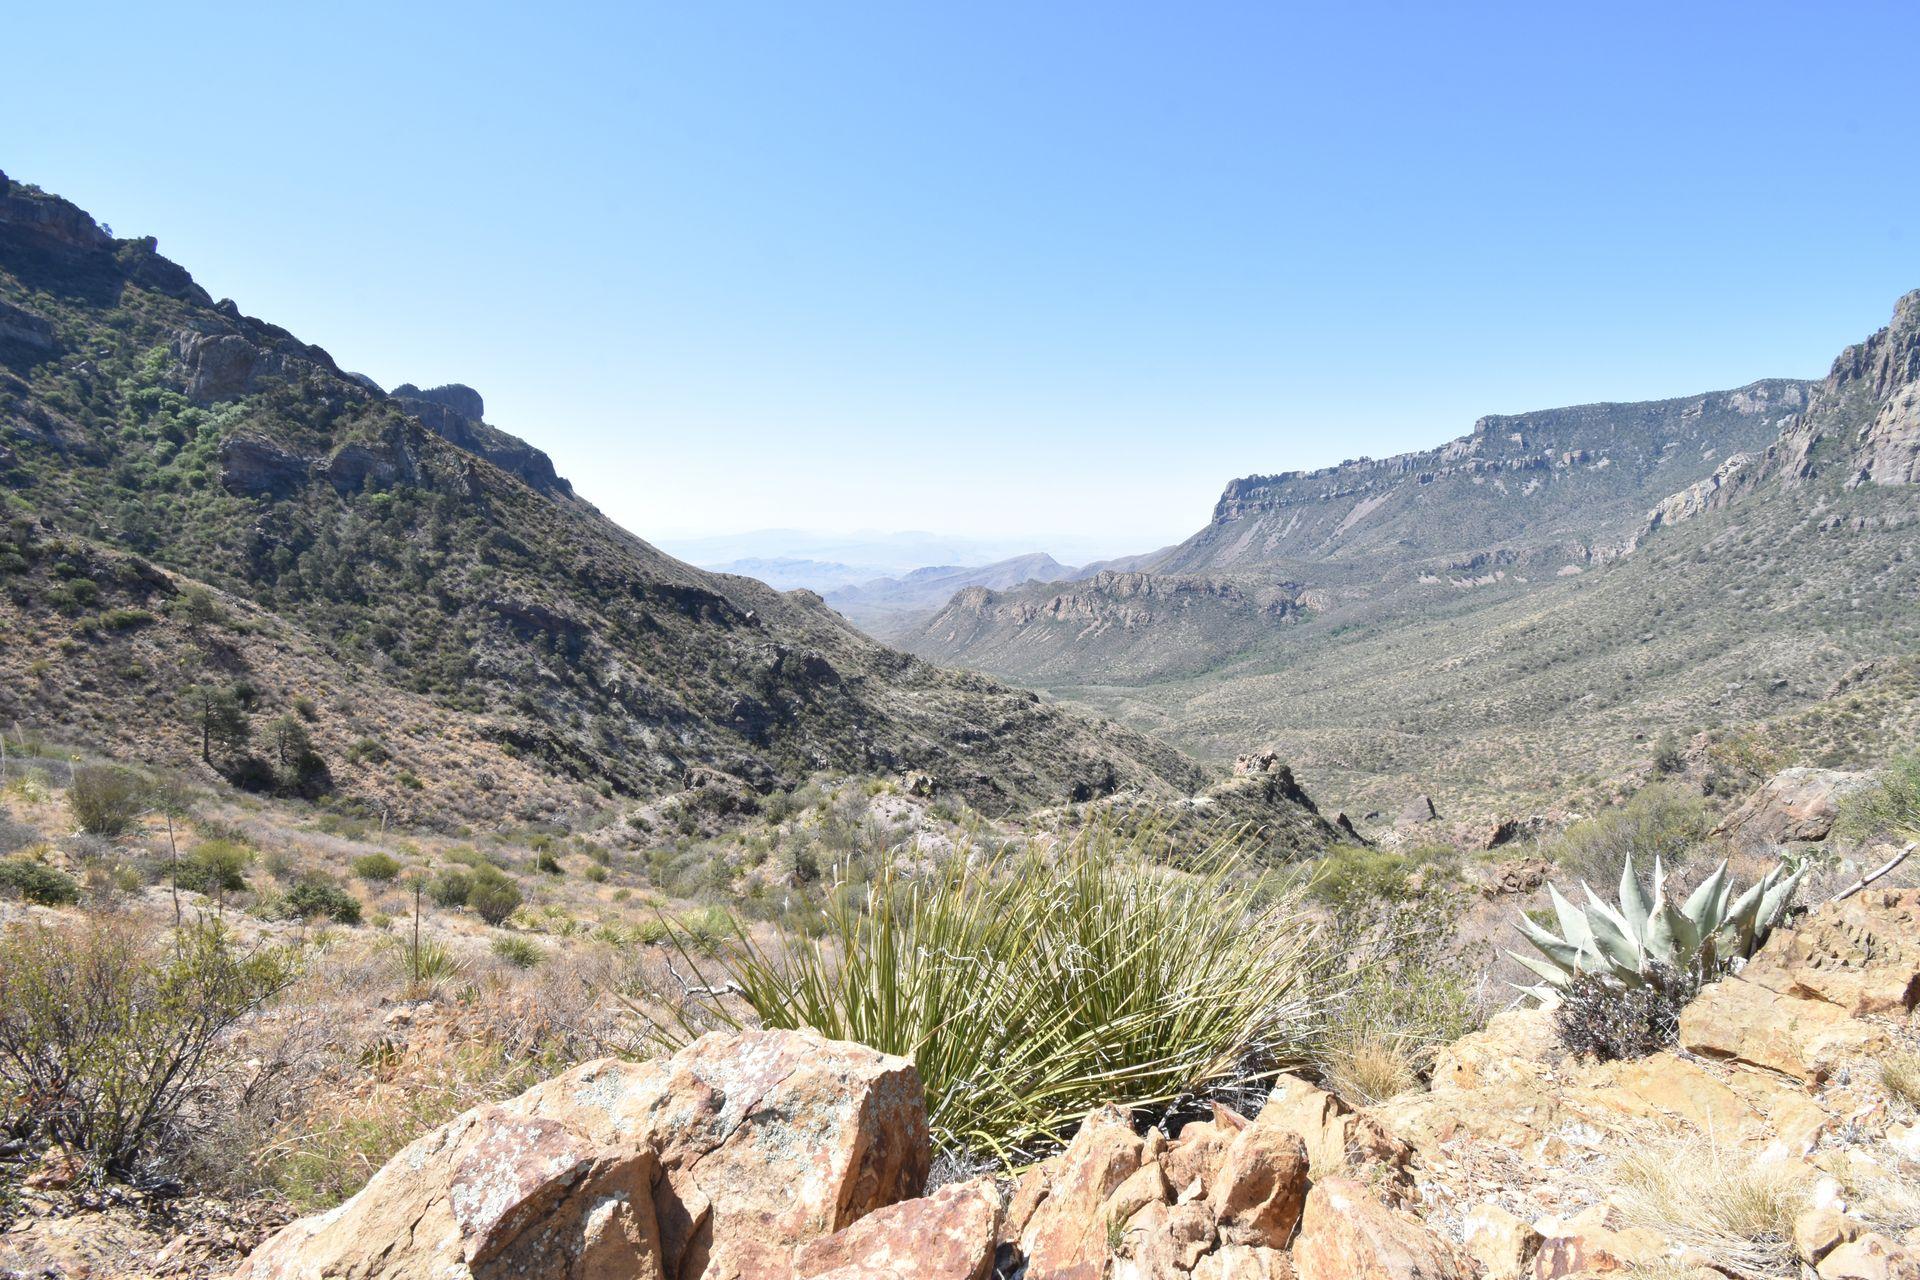 A view of mountains along the Lost Mine Trail in Big Bend National Park.